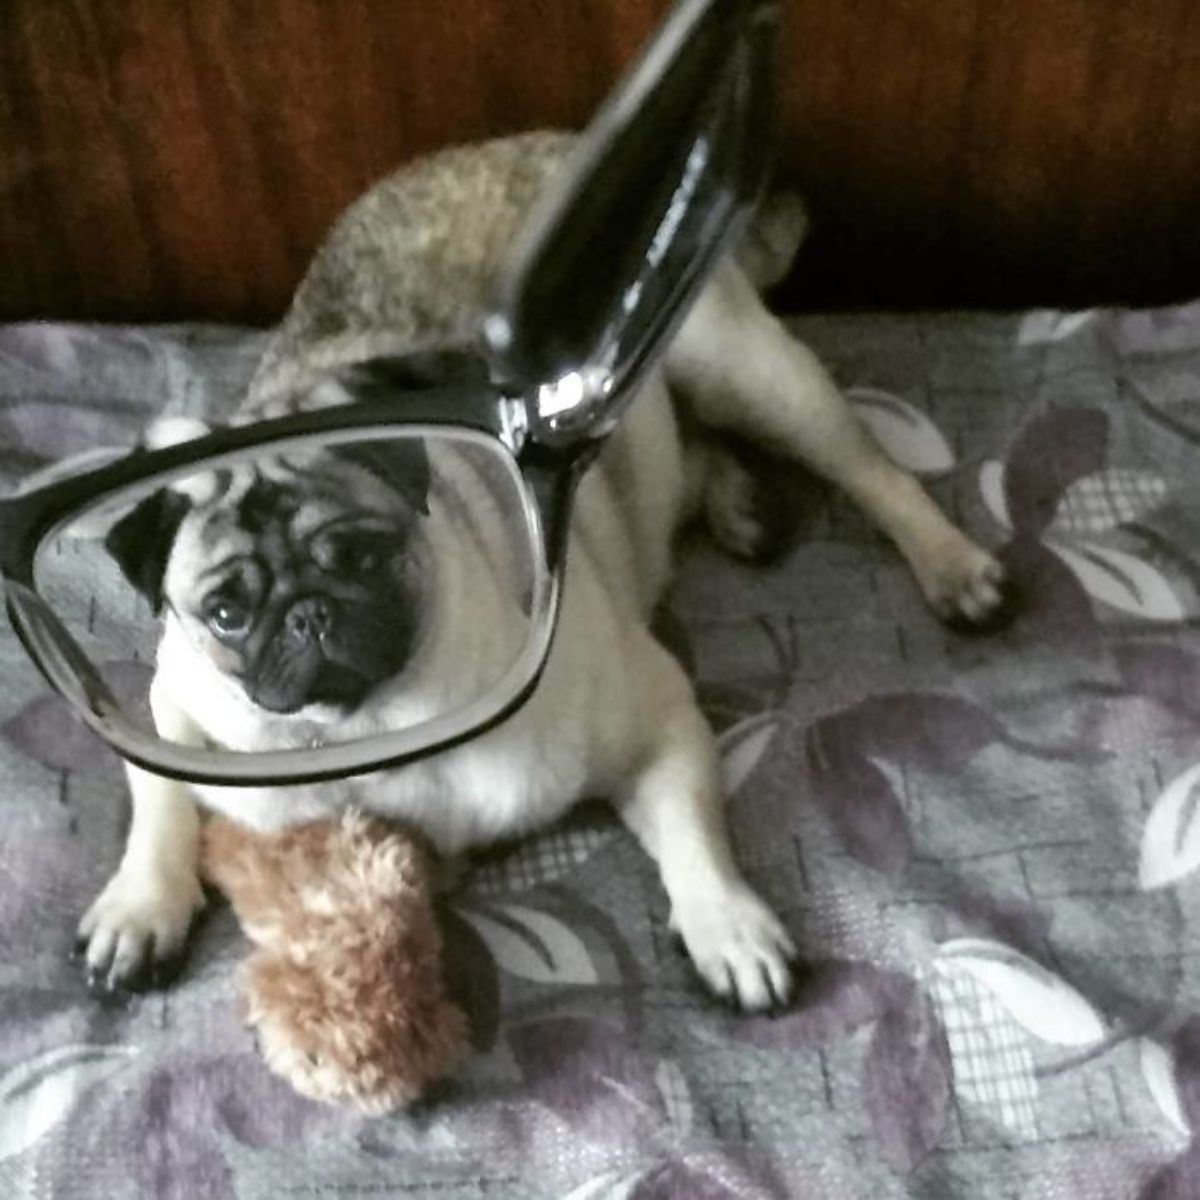 white pug laying on grey blanket seen through black framed spectacles